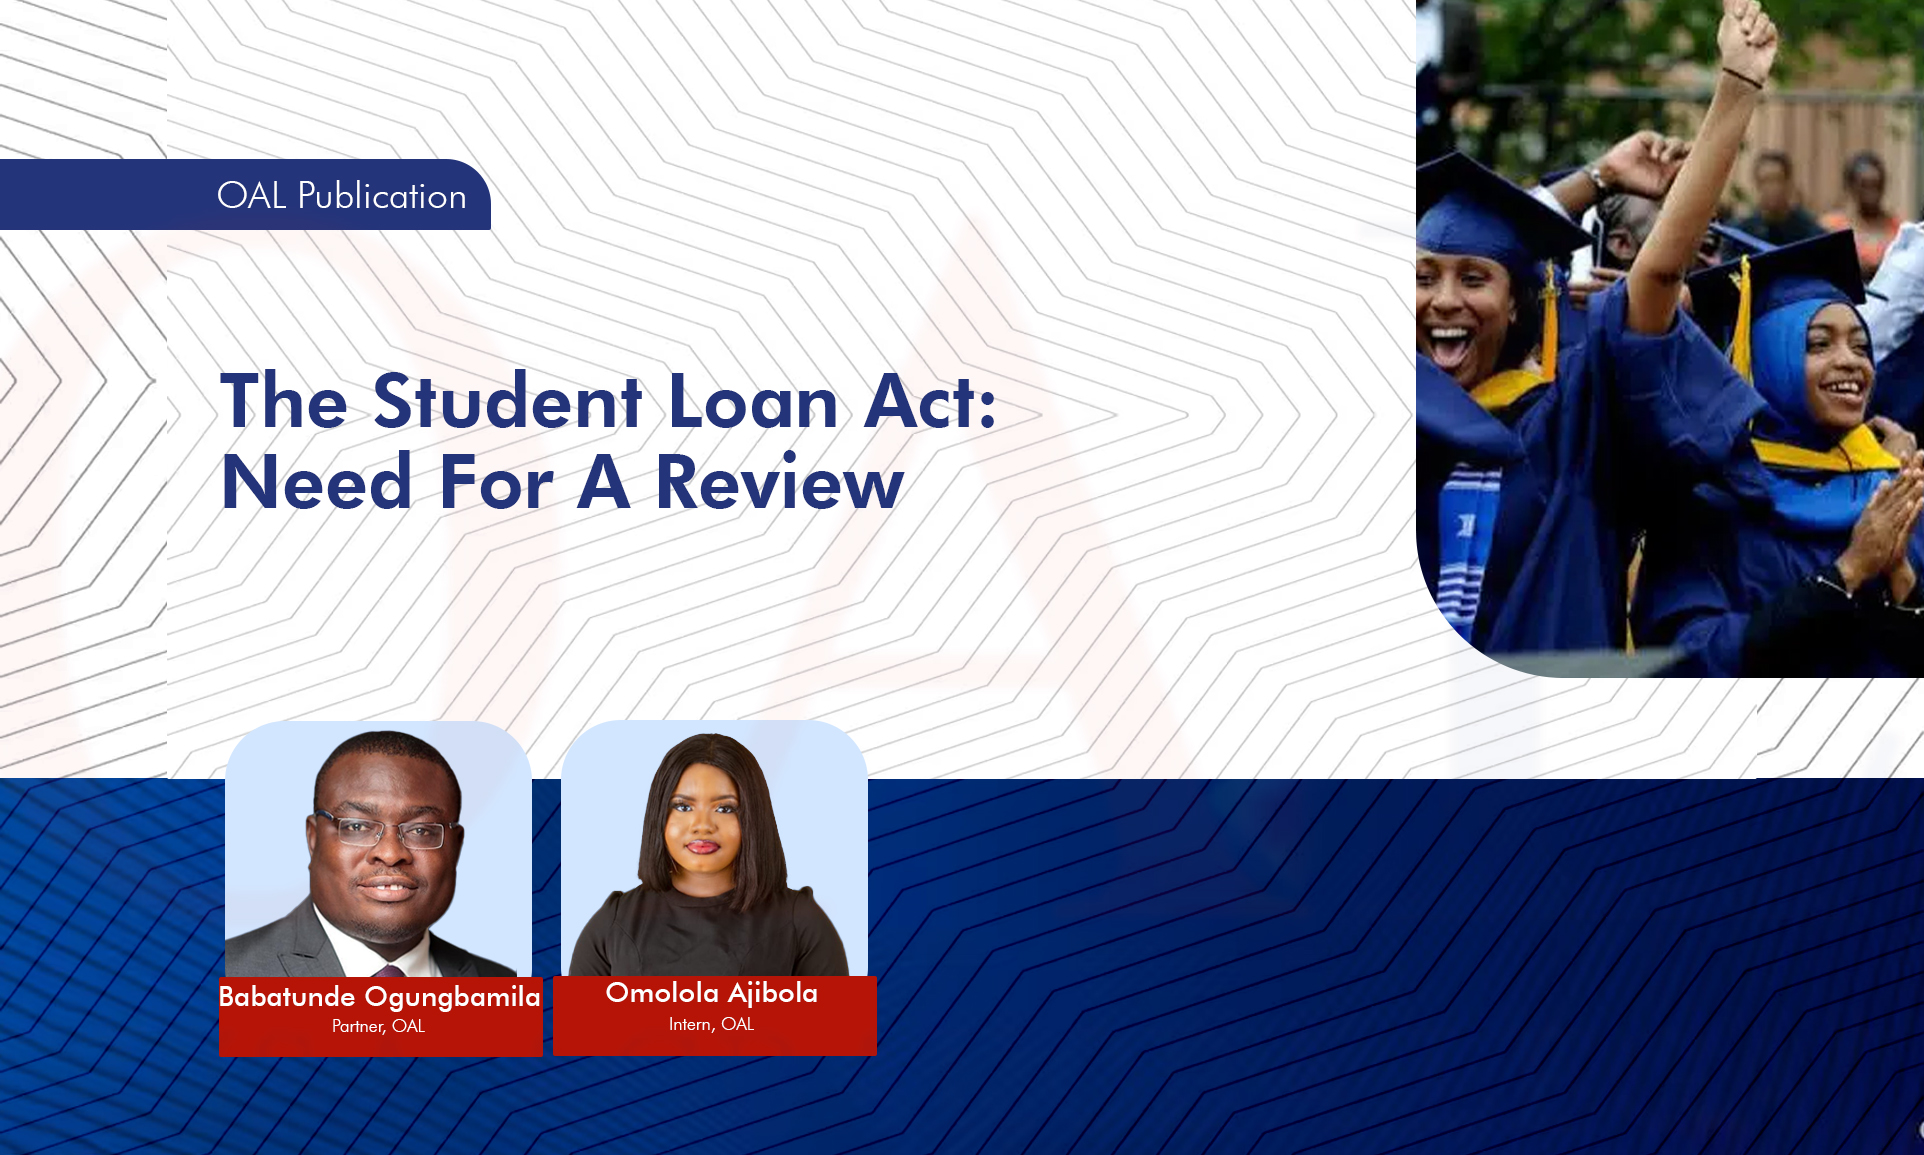 The Student Loan Act: Need For A Review